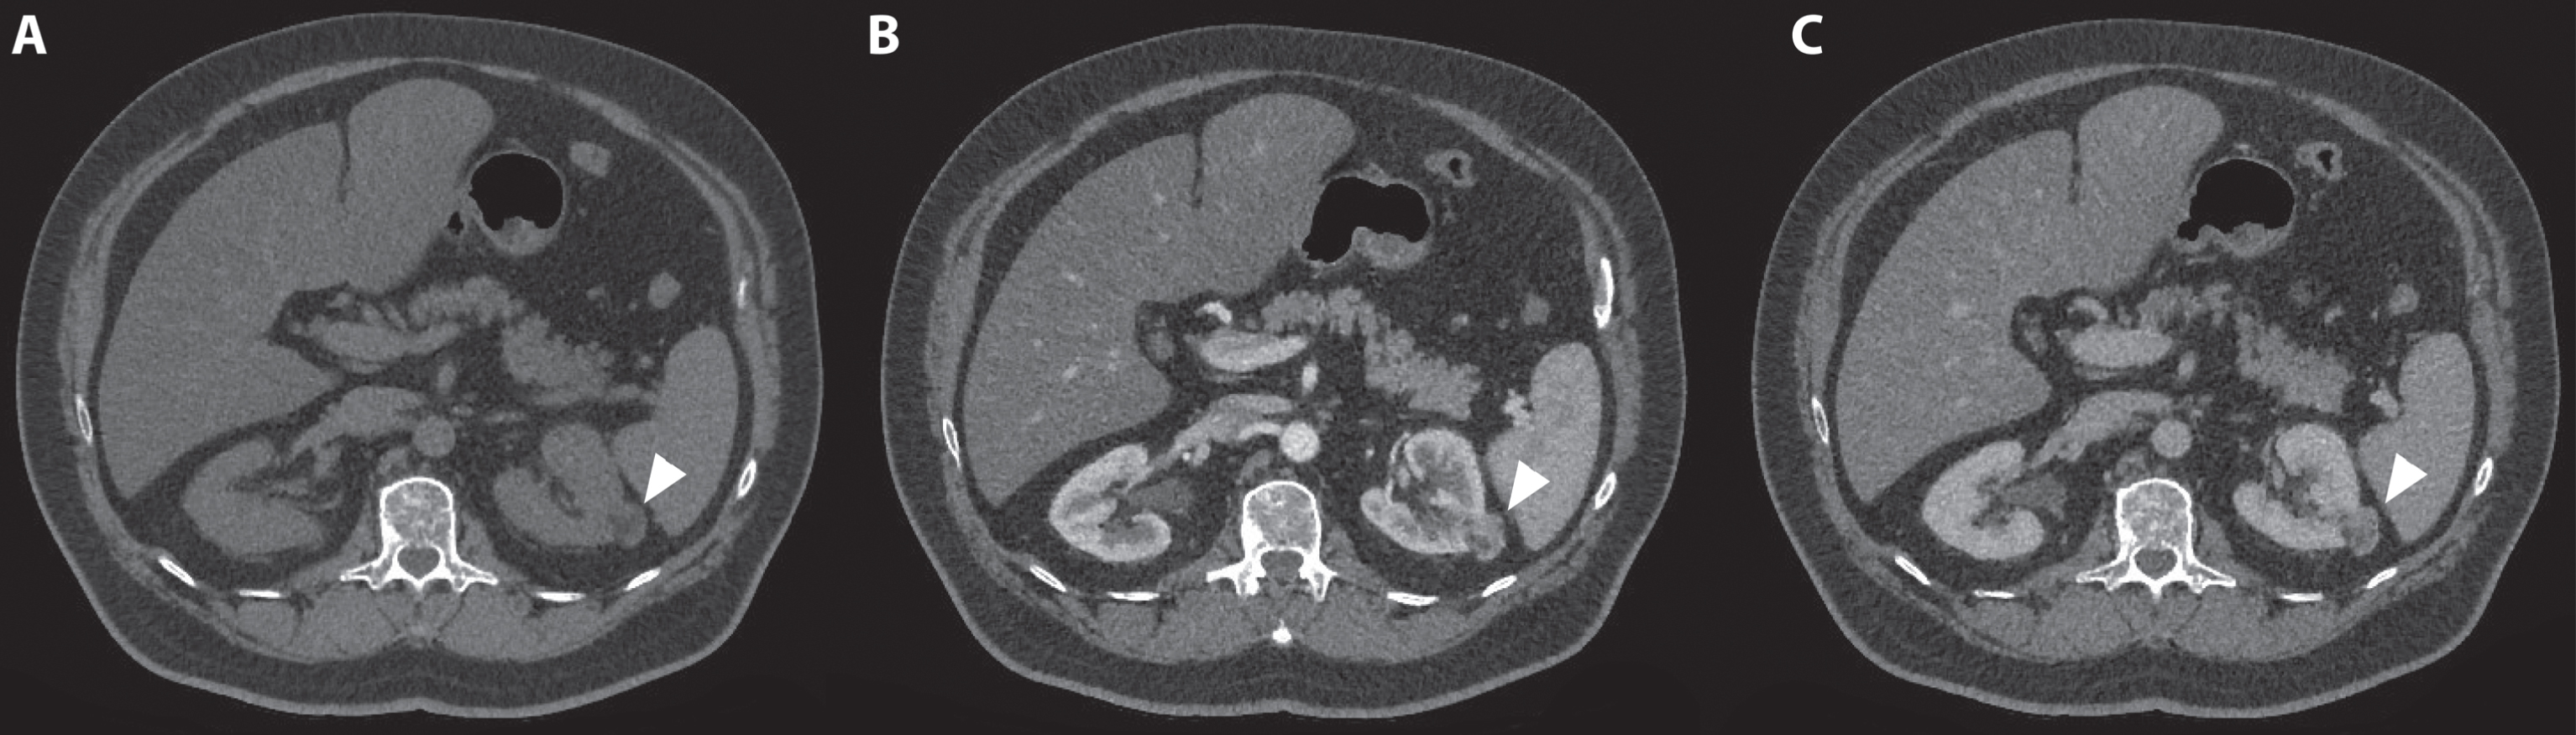 A 72-year-old man was referred for an incidentaloma found on a CT scan of the thorax, which included a part of the kidneys. A 3-phase CT scan showed a 28-mm×24-mm large interpolar tumor of the left kidney (marked with white arrowhead). On unenhanced CT, the lesion had areas of fat with an attenuation of –36 Hounsfield units (HU). (A) In the corticomedullary phase, avid tumor enhancement is seen (B) with a moderate washout effect in the nephrogenic phase (C). These CT findings are consistent with an angiomyolipoma. However, fat-containing renal cell carcinoma (RCC) cannot be entirely excluded as a diagnosis, and this lesion will be monitored with imaging.